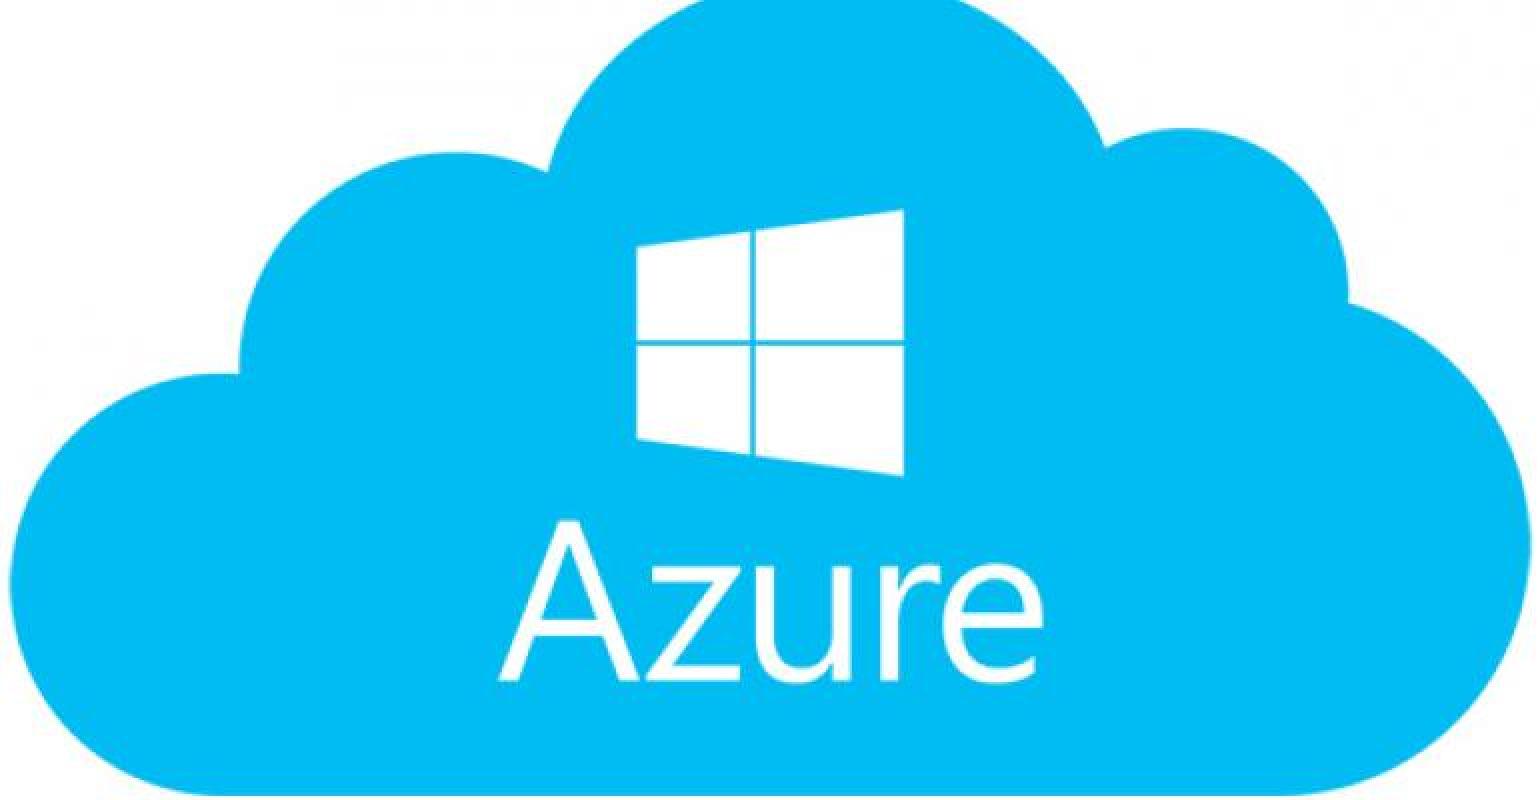 Azure Cloud - How to create and deploy an app on cloud